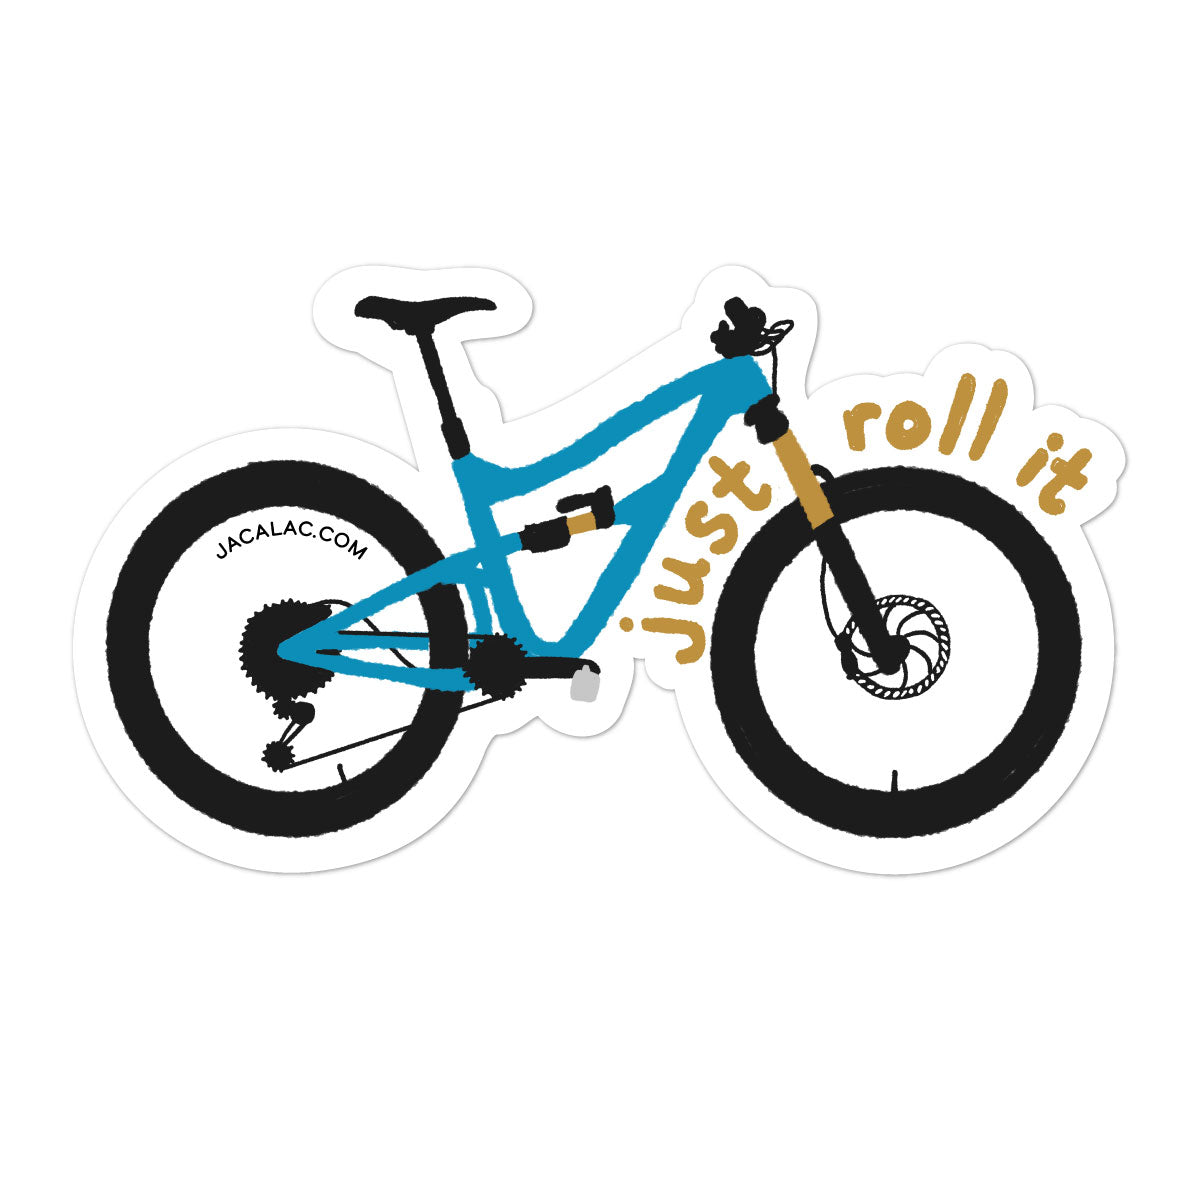 Blue mountain bike die cut sticker with the text "Just Roll It"